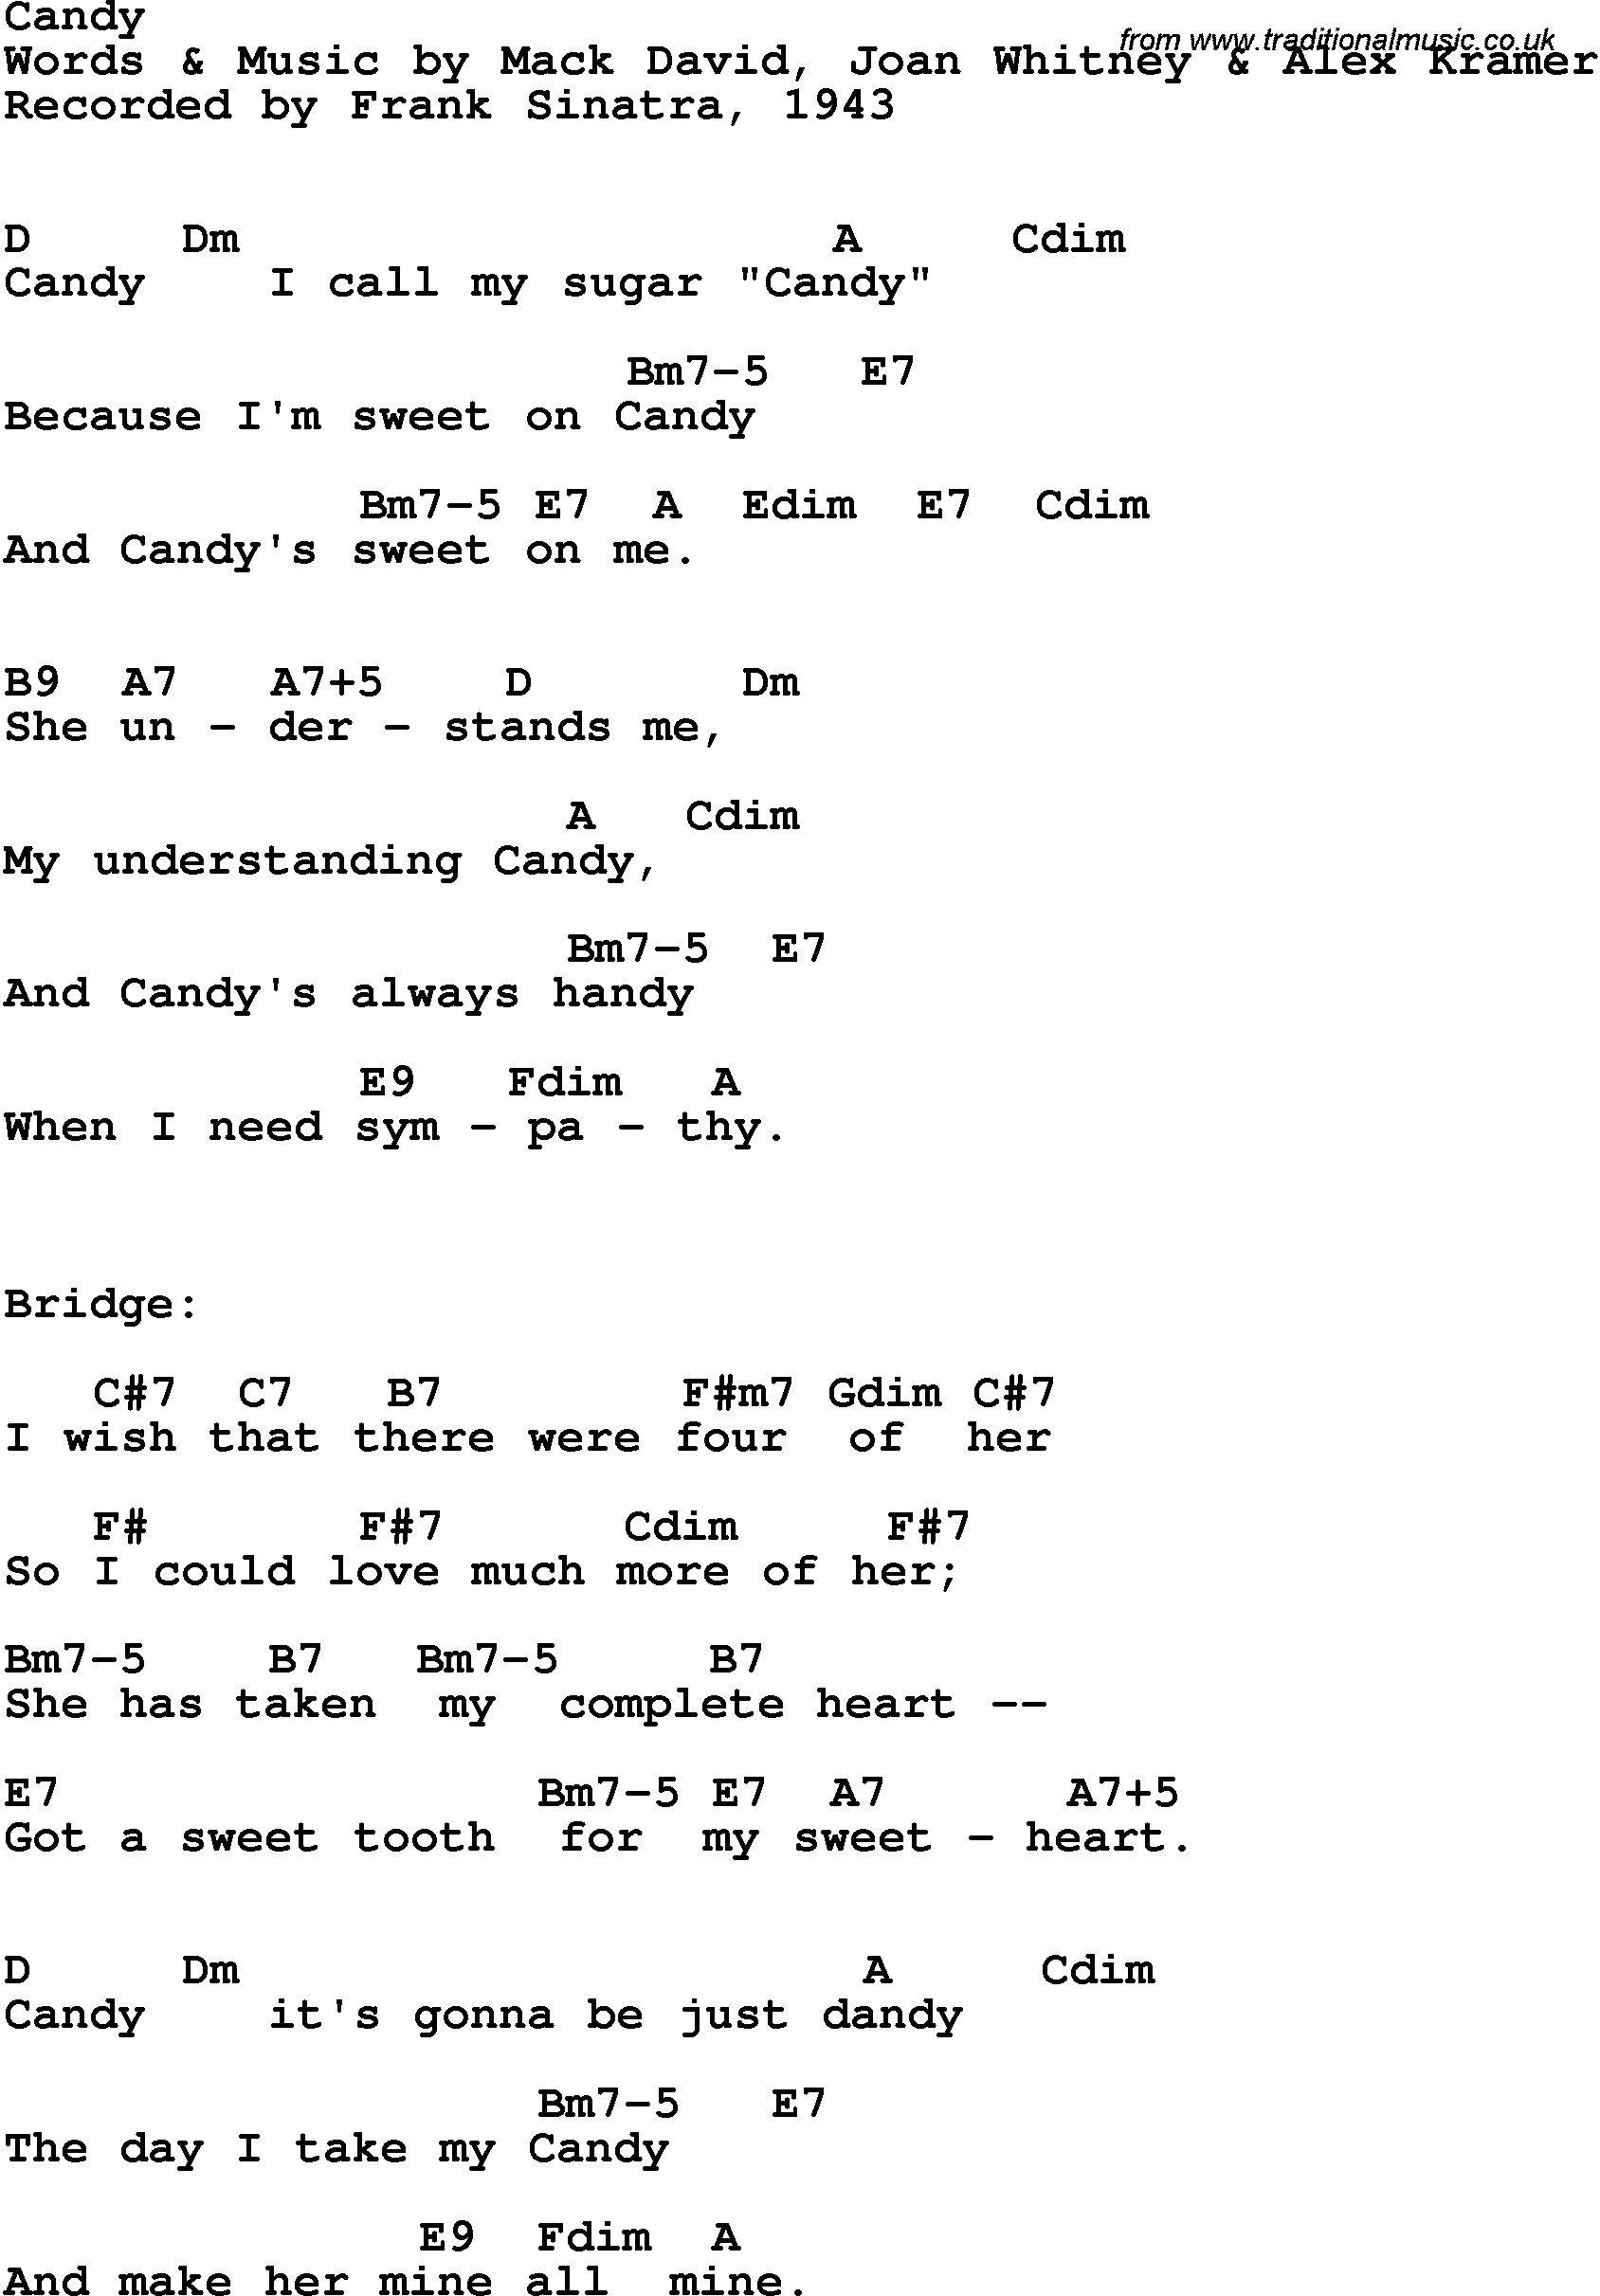 Song Lyrics with guitar chords for Candy - Frank Sinatra, 1943